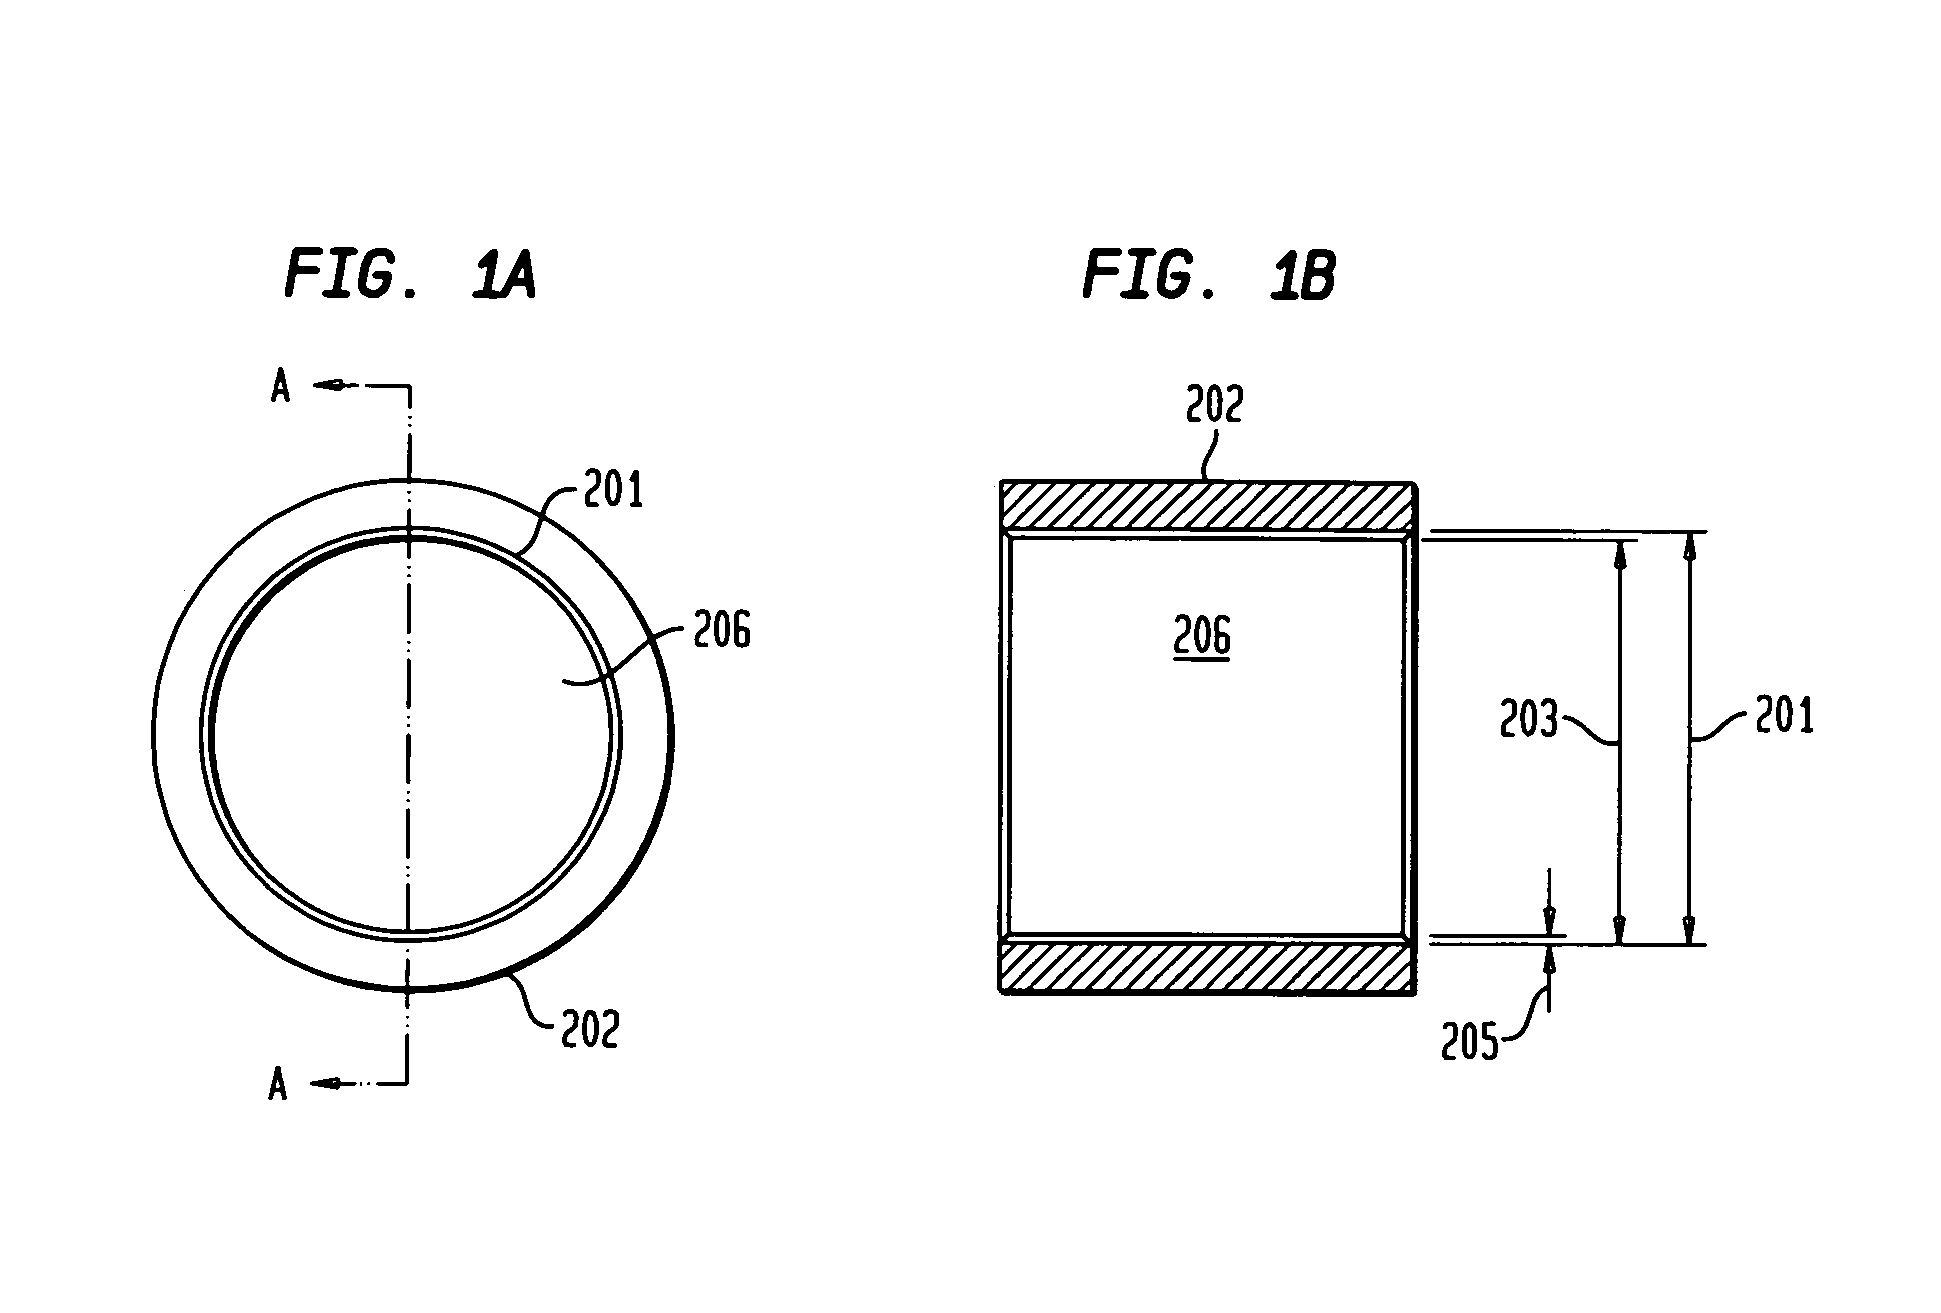 Centrifugal turbine blower with gas foil bearings